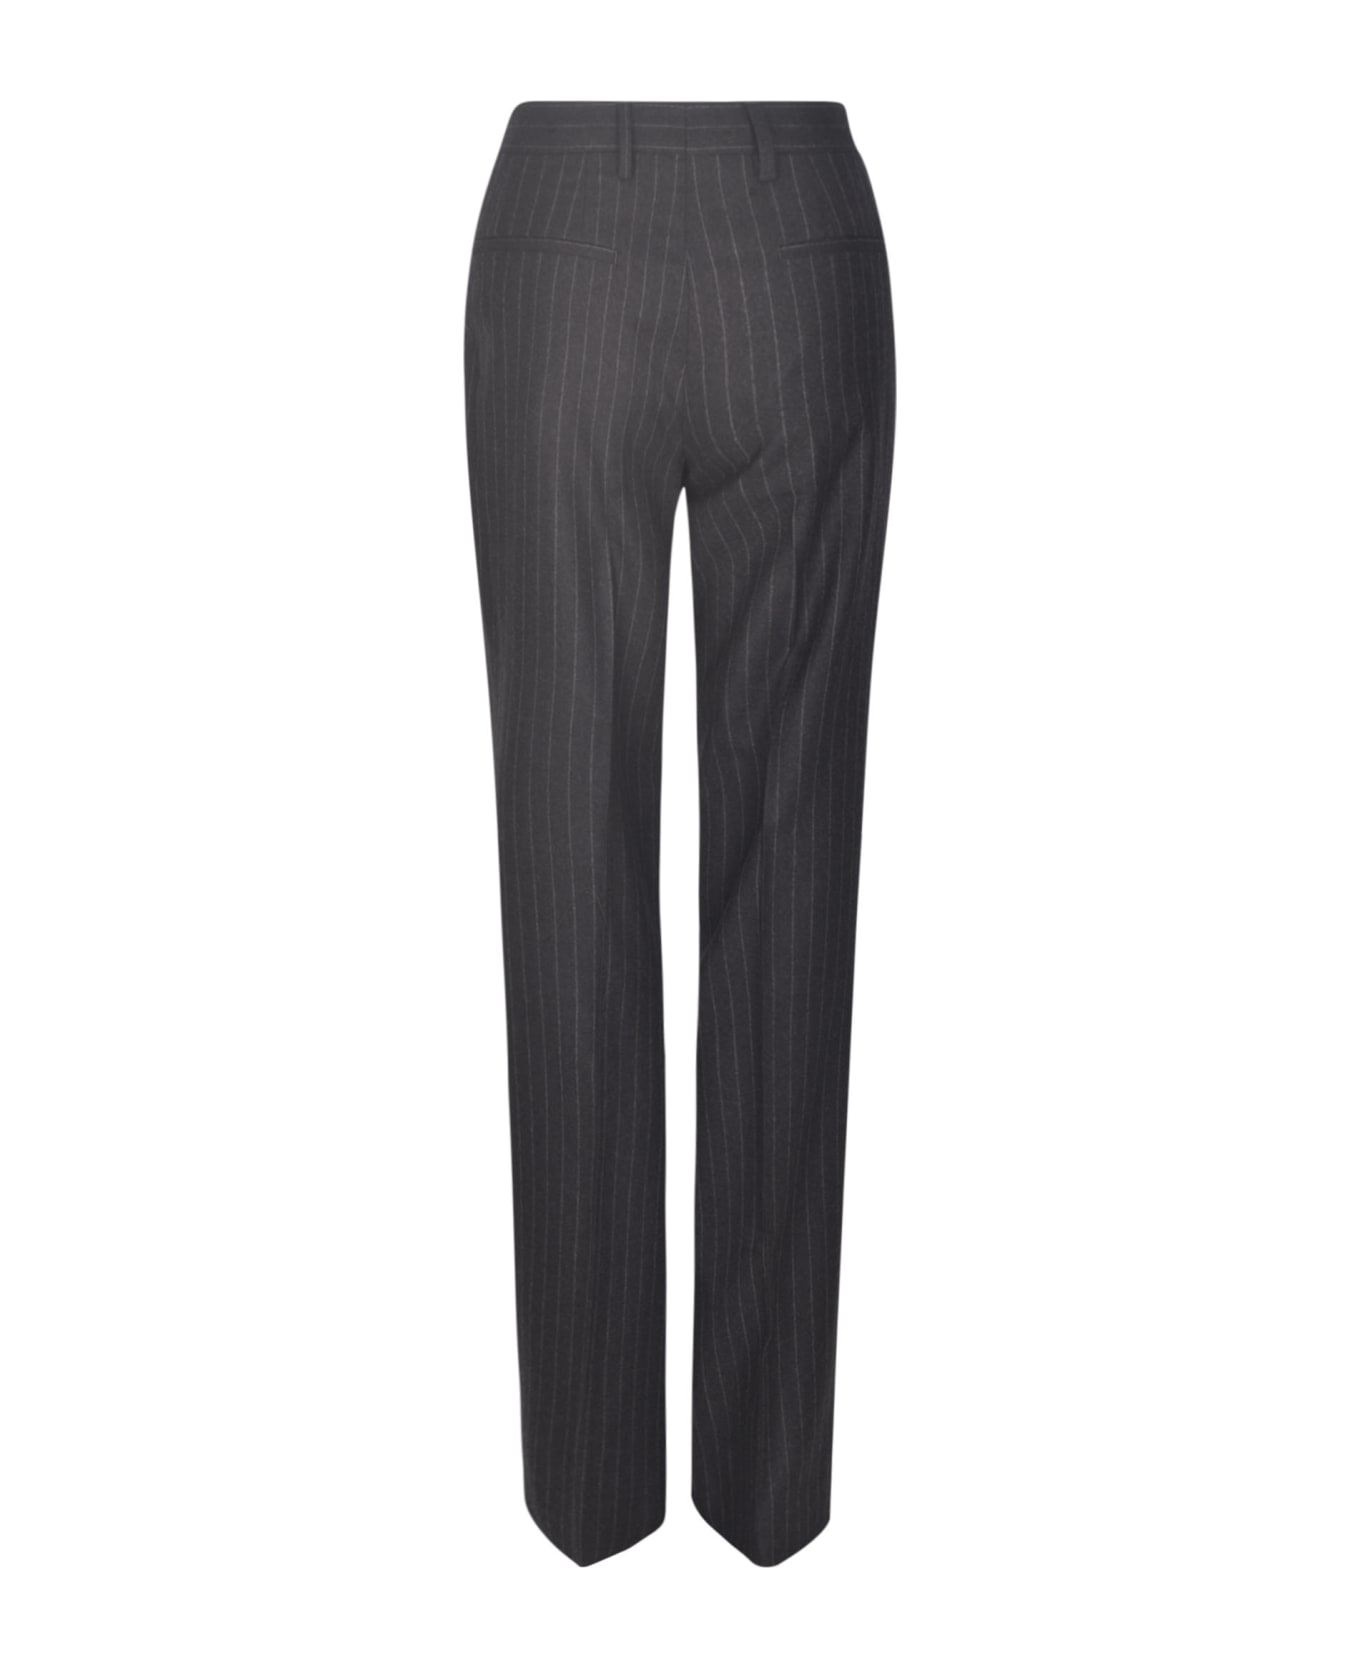 Dries Van Noten Straight Leg Striped Trousers - Anthracite ボトムス